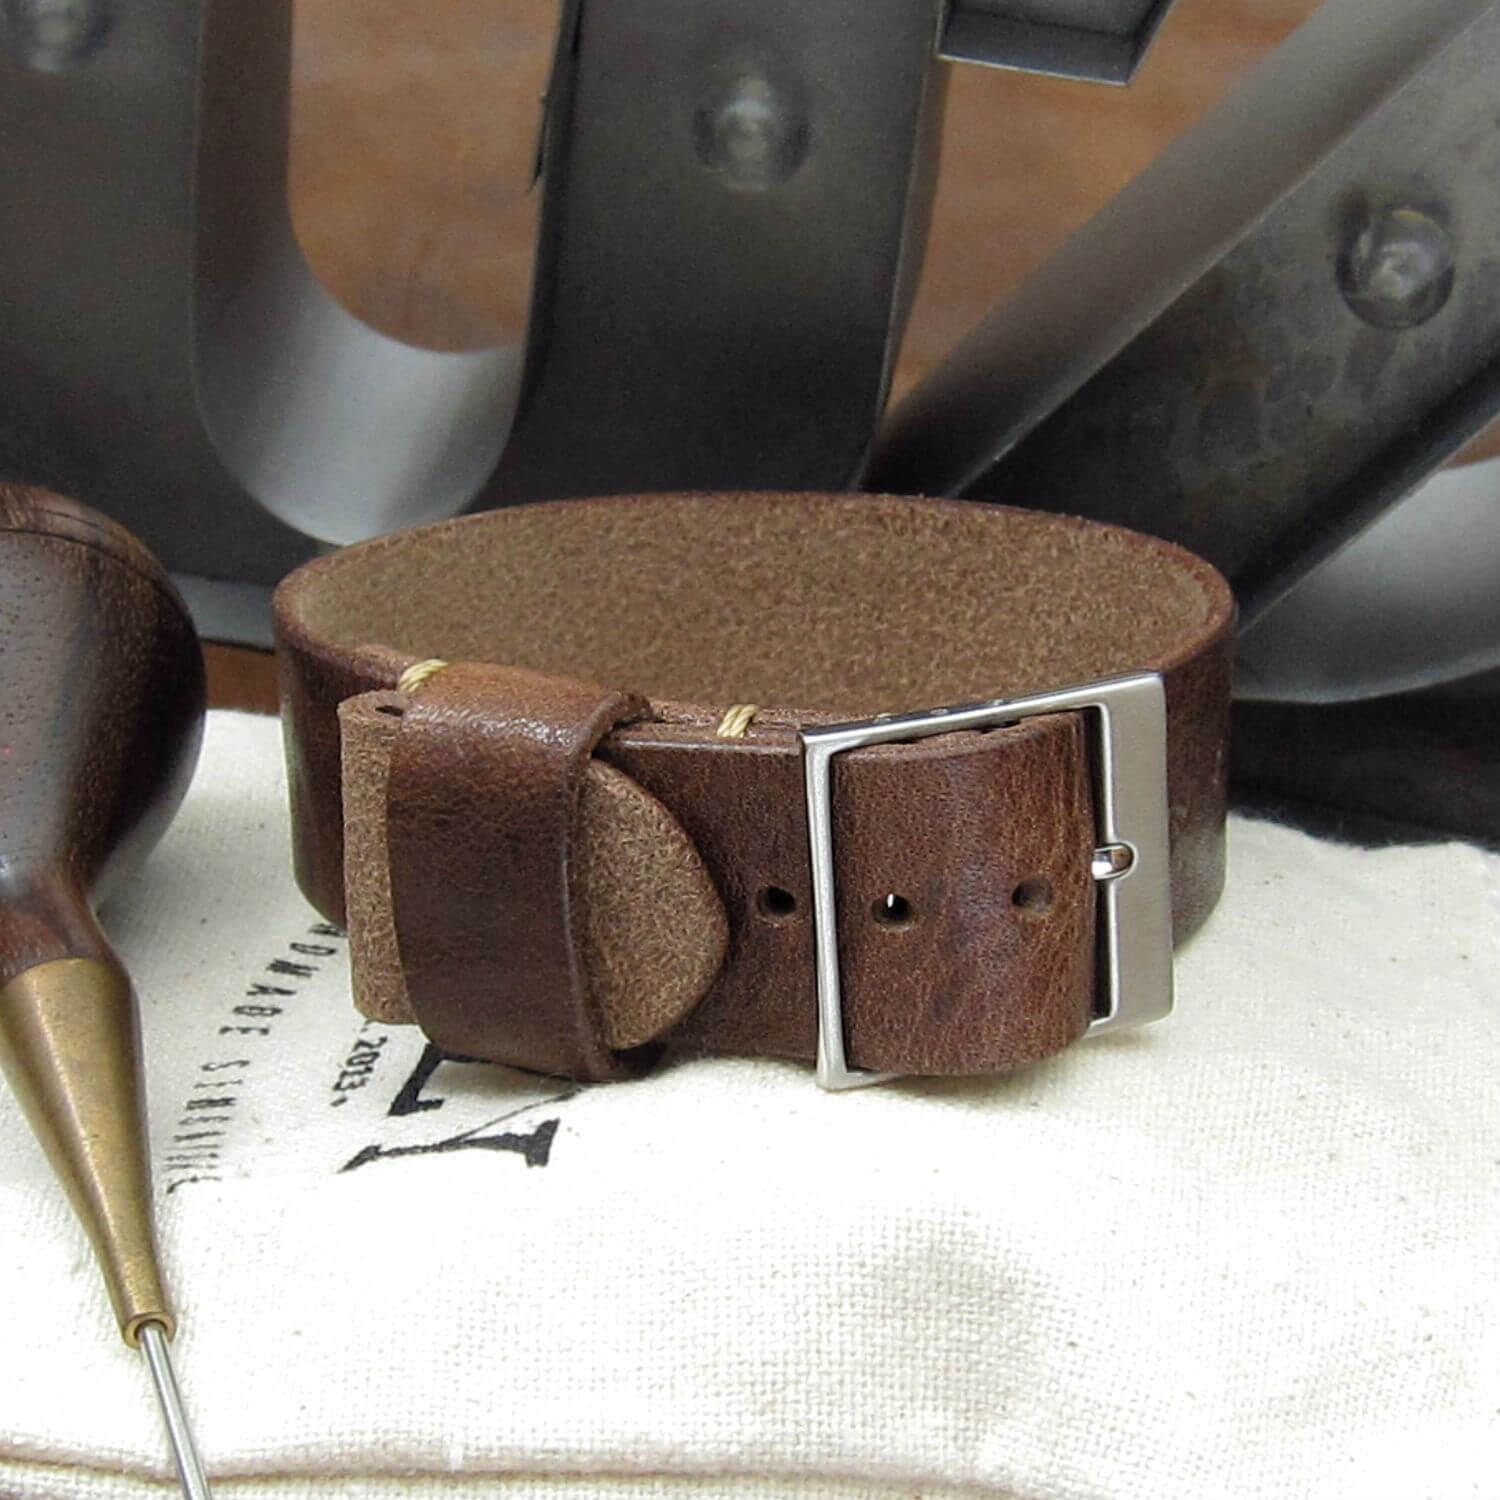 Leather Watch Strap, Classic RAF II Vintage 405 | Ladder Buckle | Full Grain Italian Vegetable-Tanned Leather | Cozy Handmade